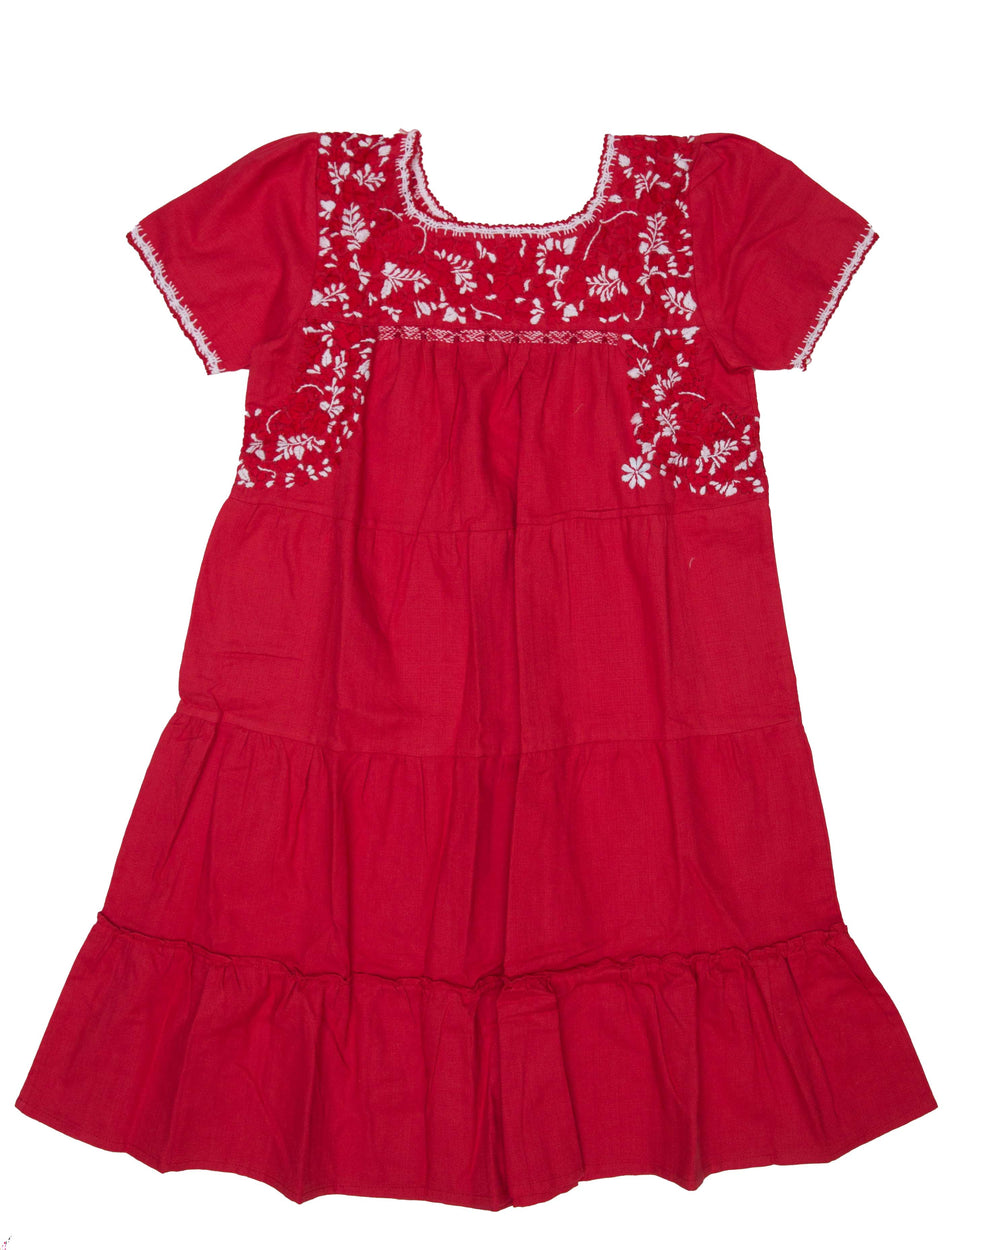 Girls Gabriela Dress | Red with Red